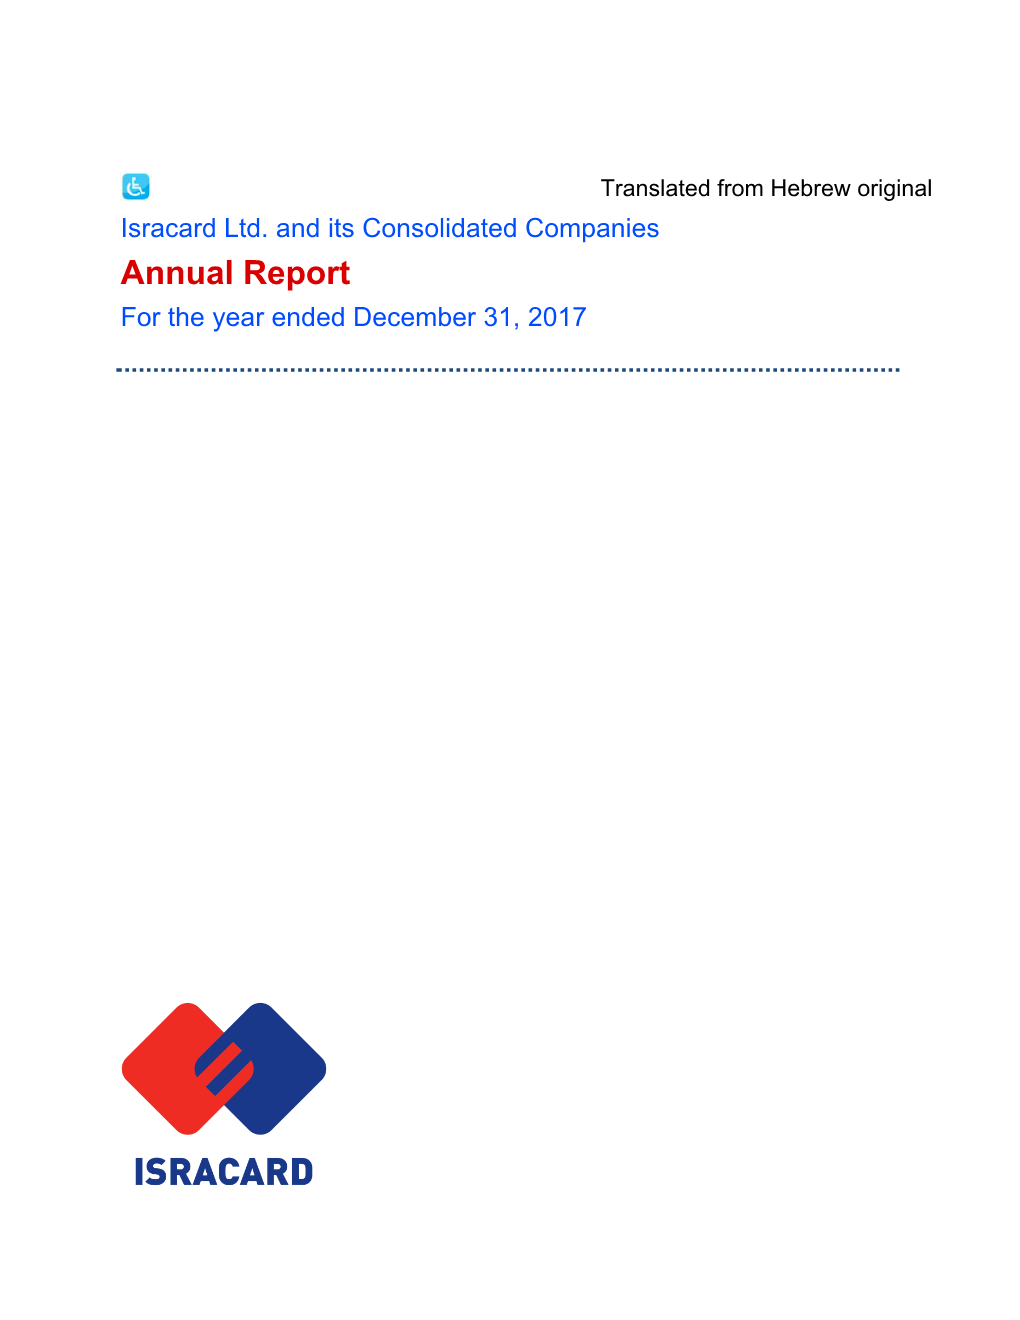 Isracard Ltd. and Its Consolidated Companies Annual Report for the Year Ended December 31, 2017